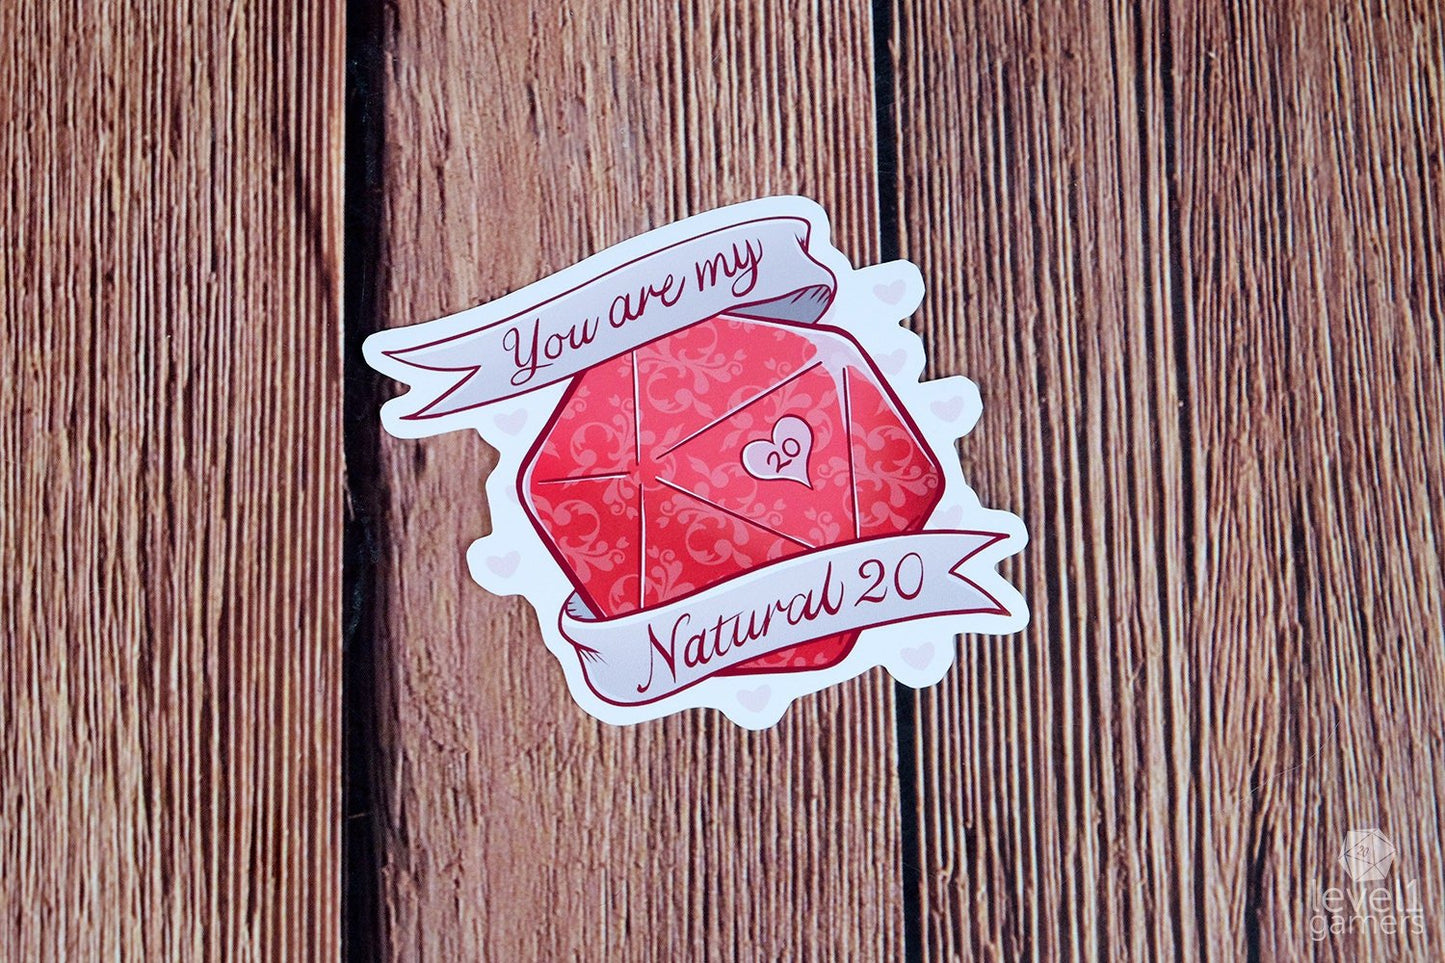 You Are My Natural 20 sticker  Level 1 Gamers   